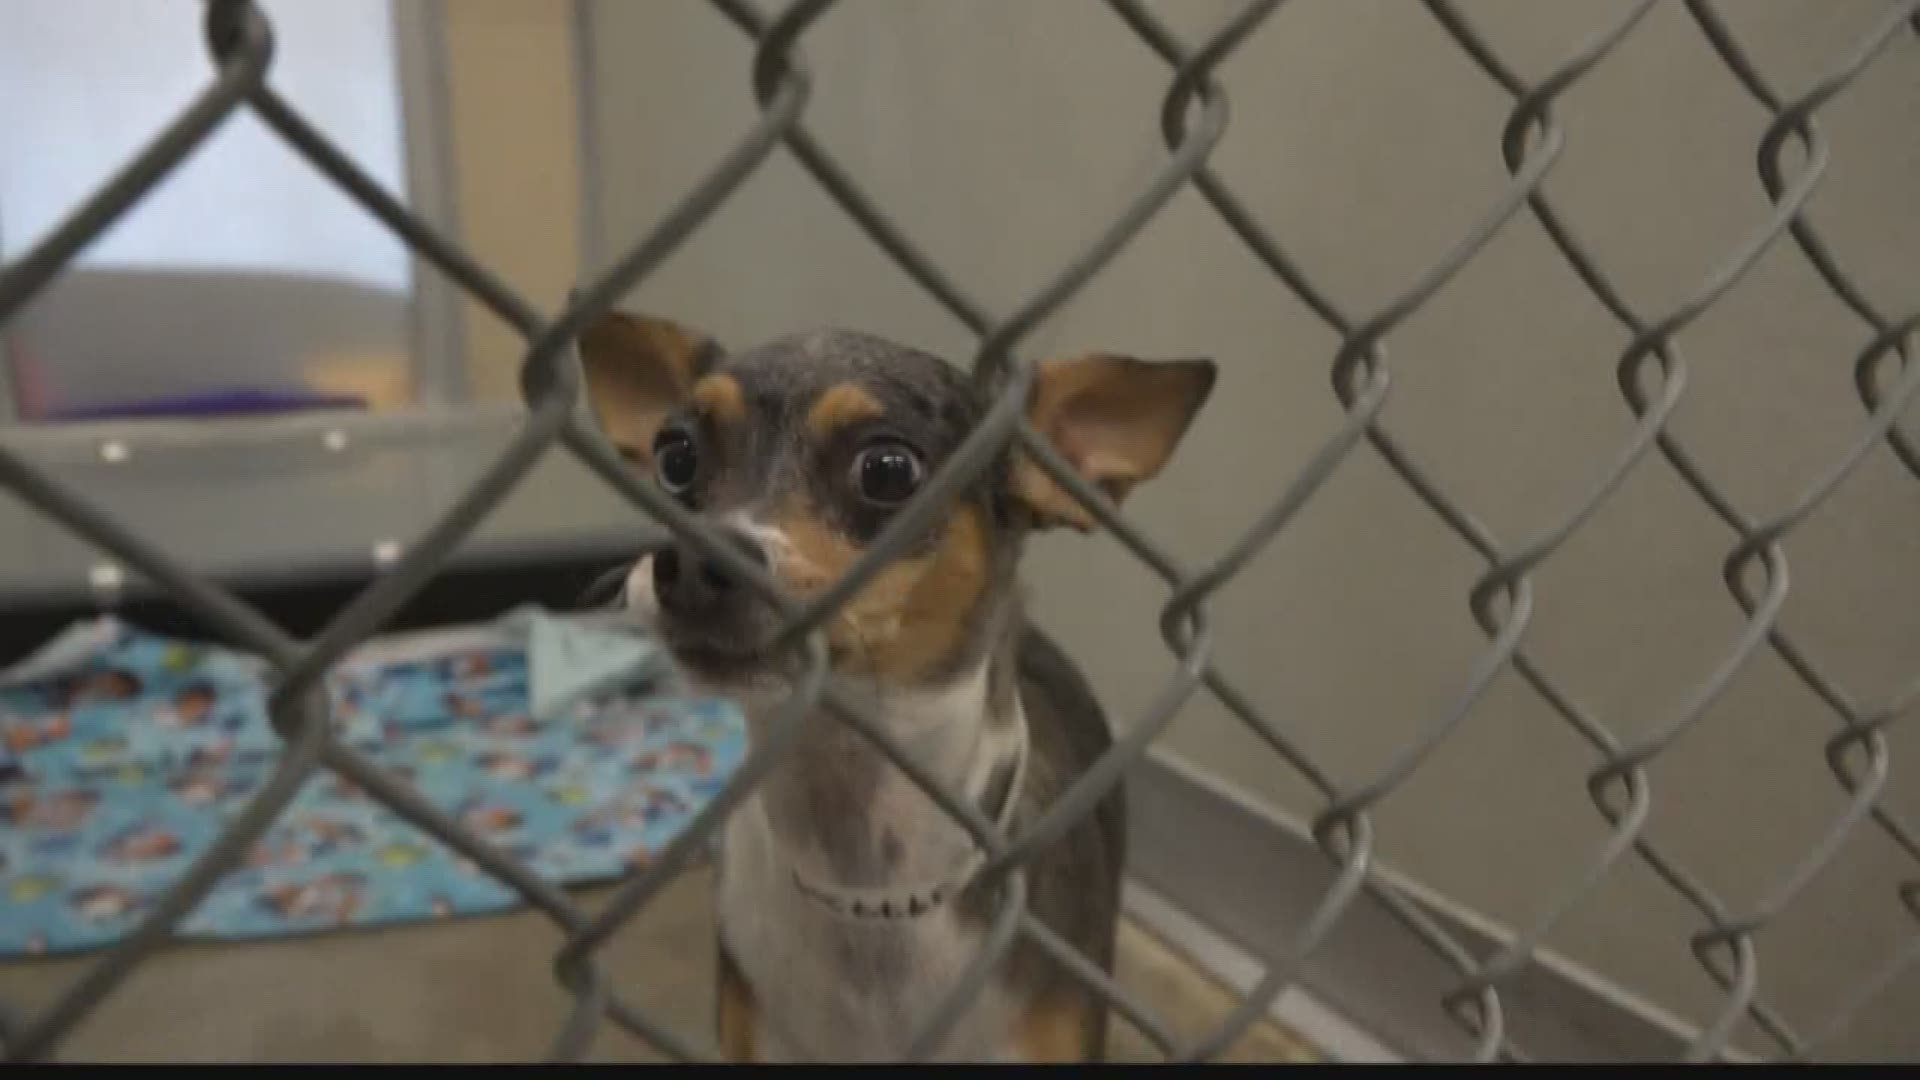 KREM 2's Amanda Roley goes to local animal shelters to see what they are doing to prepare for the influx of animals from Texas.